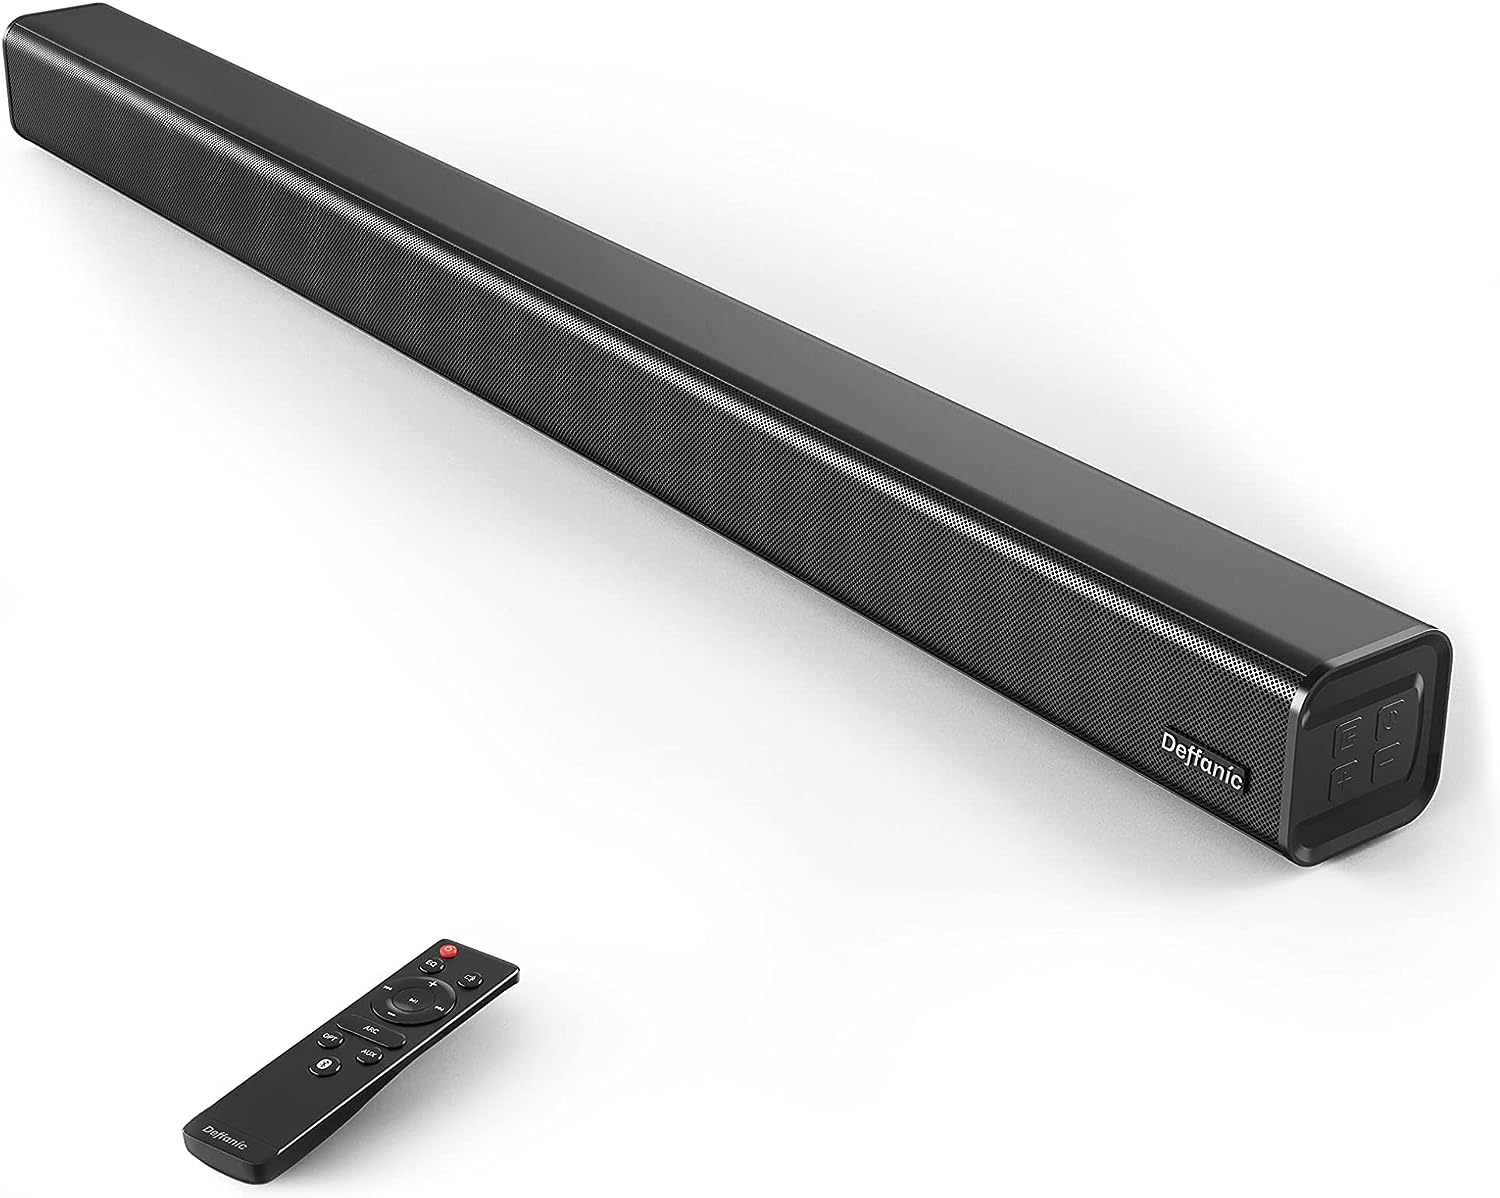 Deffanic Sound Bar for TV Home Theater Gaming Projectors with Bluetooth, Digital Surround Sound Audio Speaker, HDMI-ARC Button Remote Control Wall Mountable, 3 Equalizer Mode for 4K HD TV, 32 inch